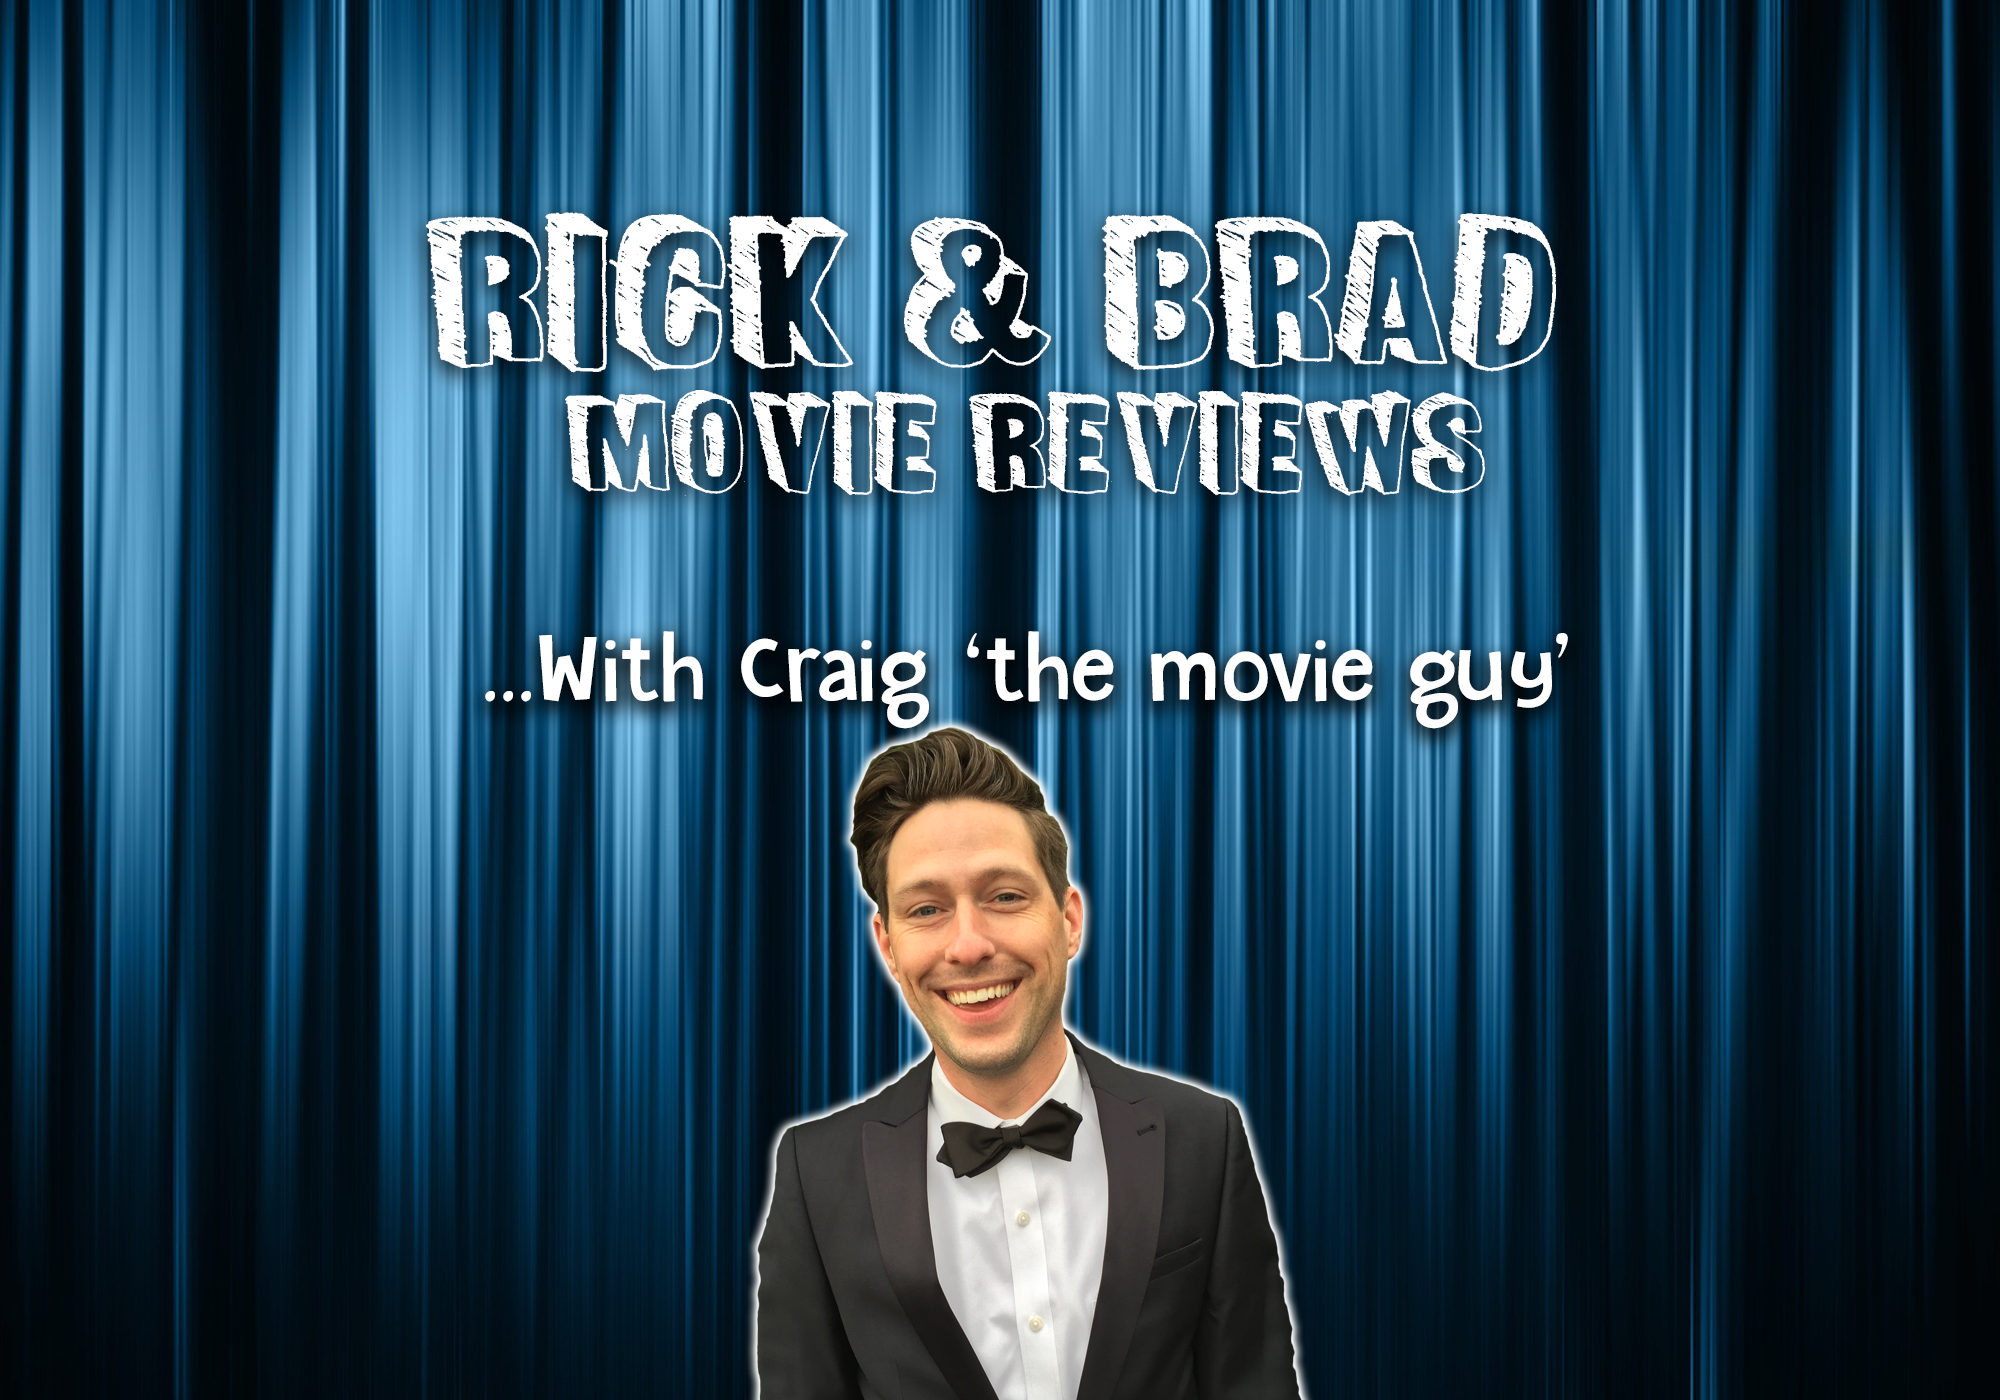 04-19 The Weekend With Craig 'The Movie Guy'